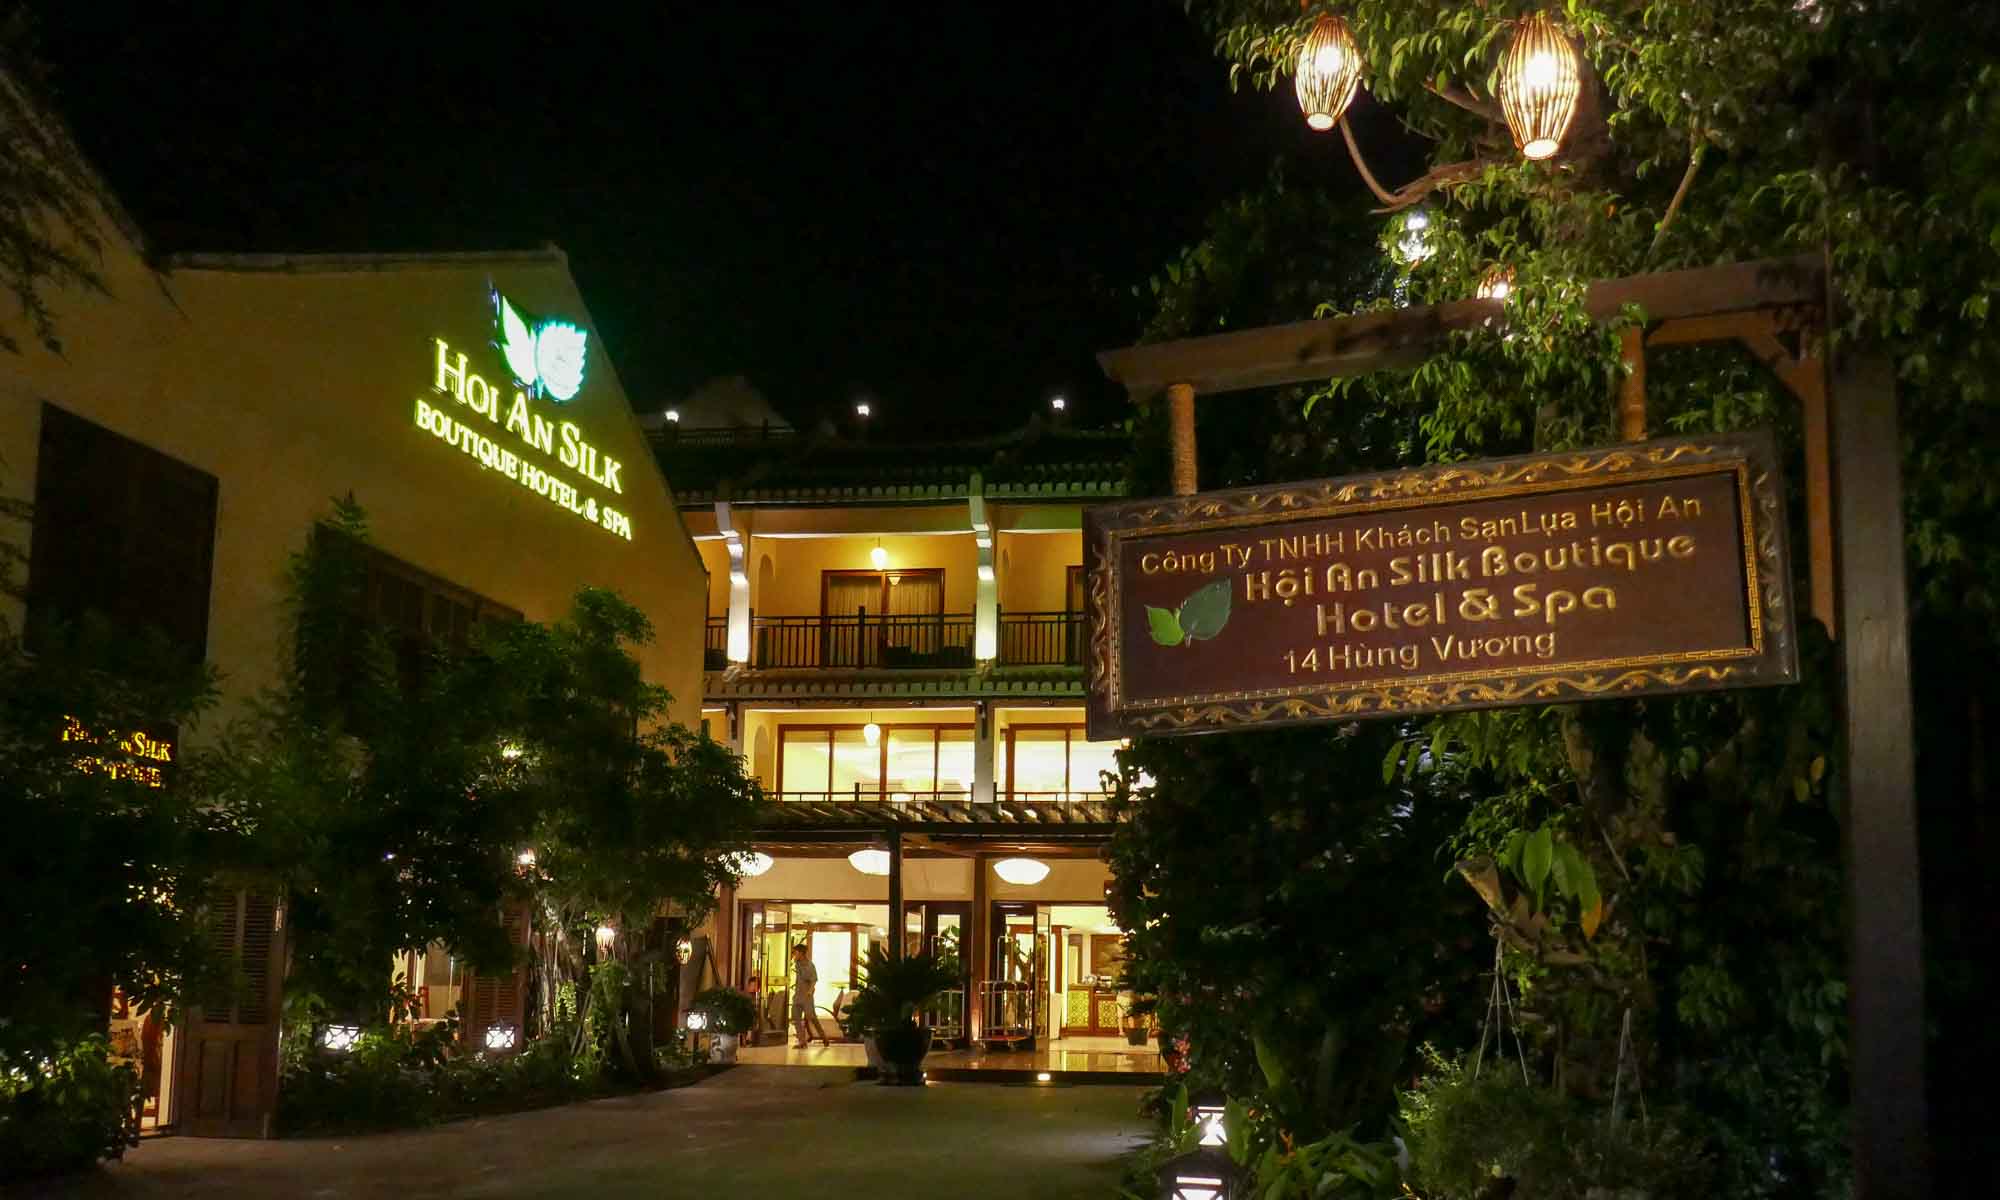 Hoi An Silk Boutique Hotel & Spa by night